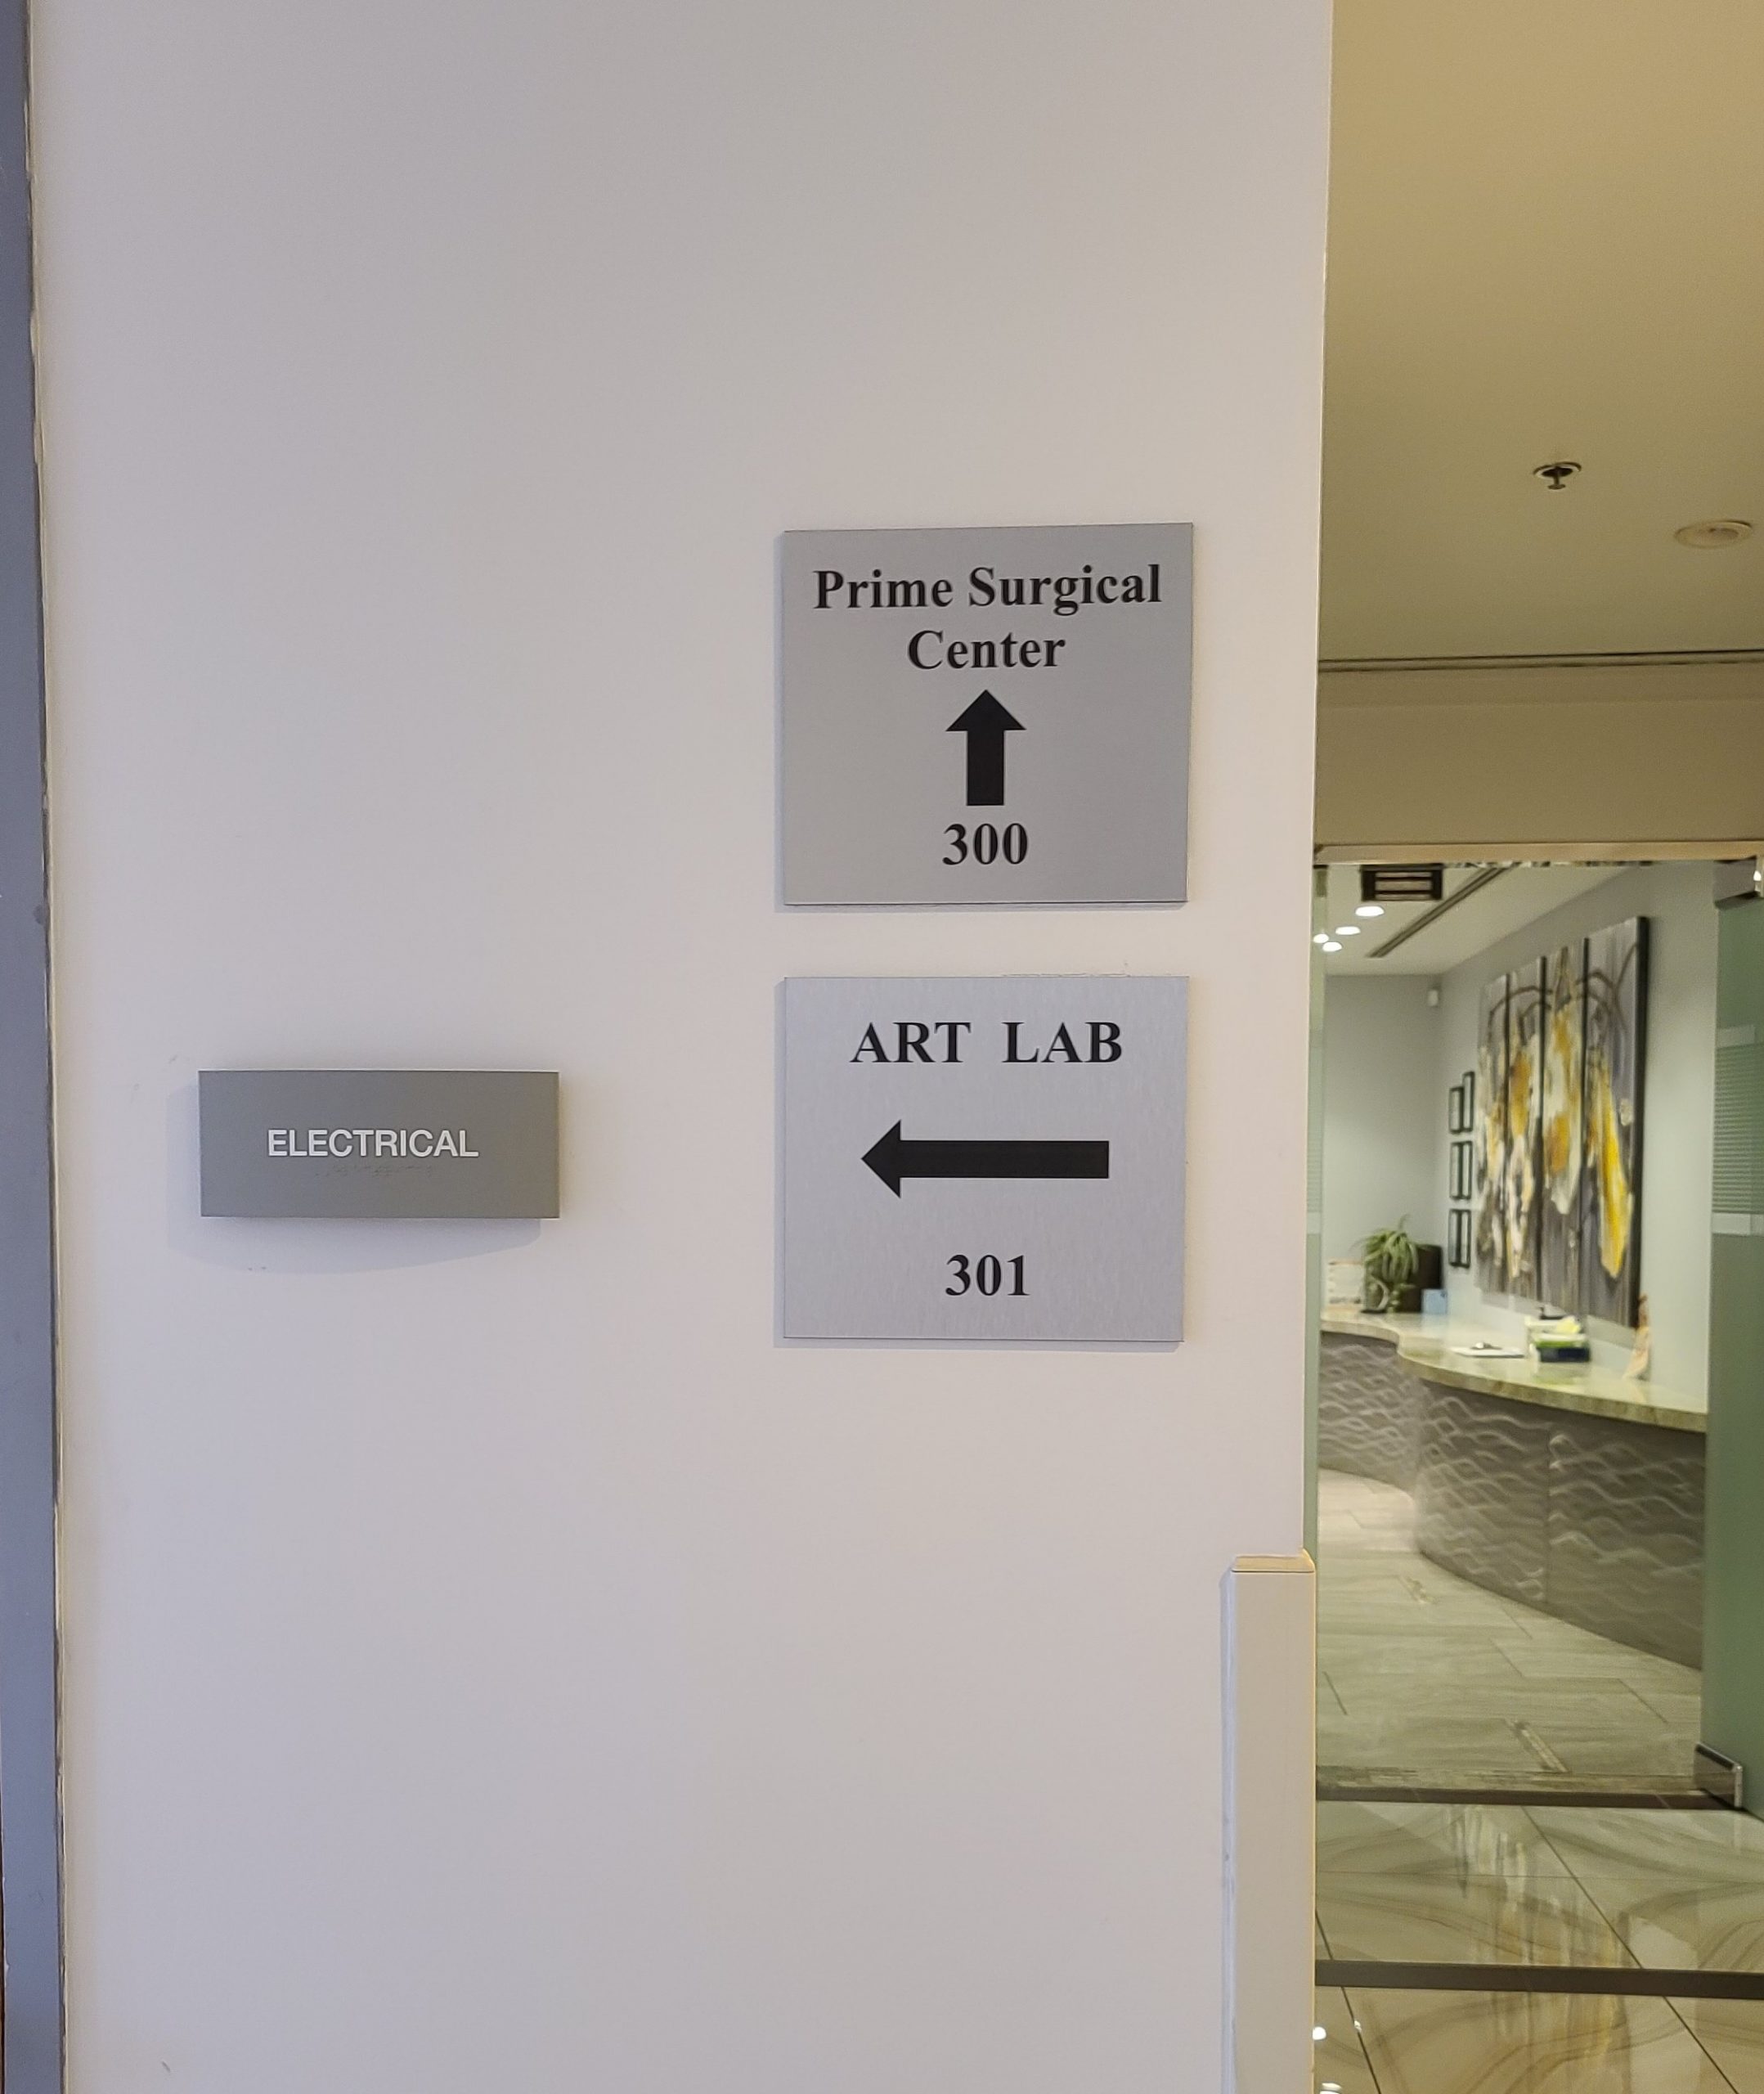 These hospital plaque signs for West Valley Medical Center serve as hallway wayfinding signs making the Encino hospital easier to navigate.